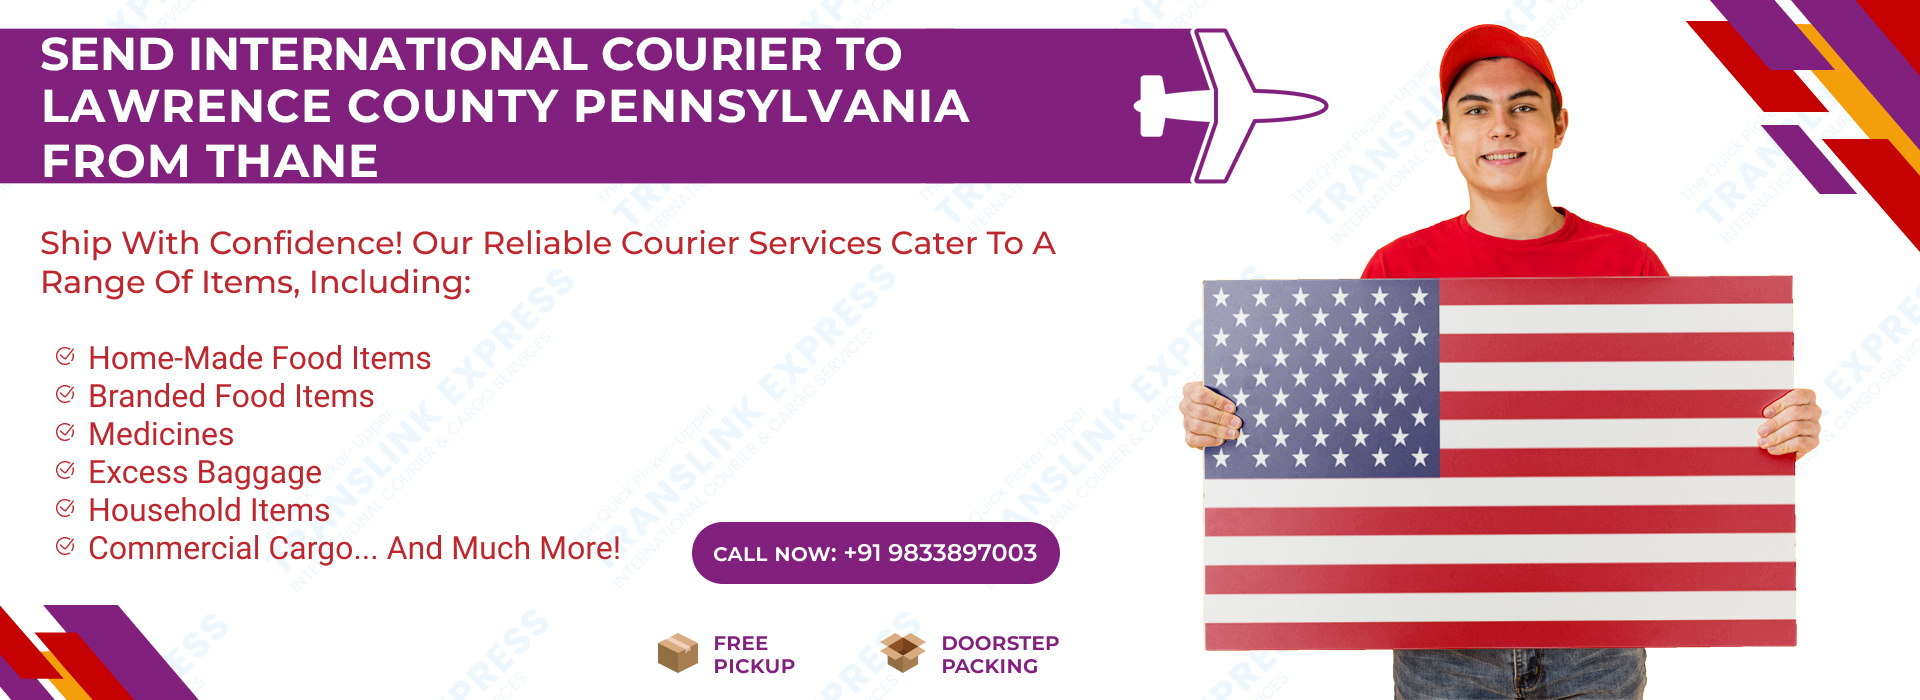 Courier to Lawrence County Pennsylvania From Thane